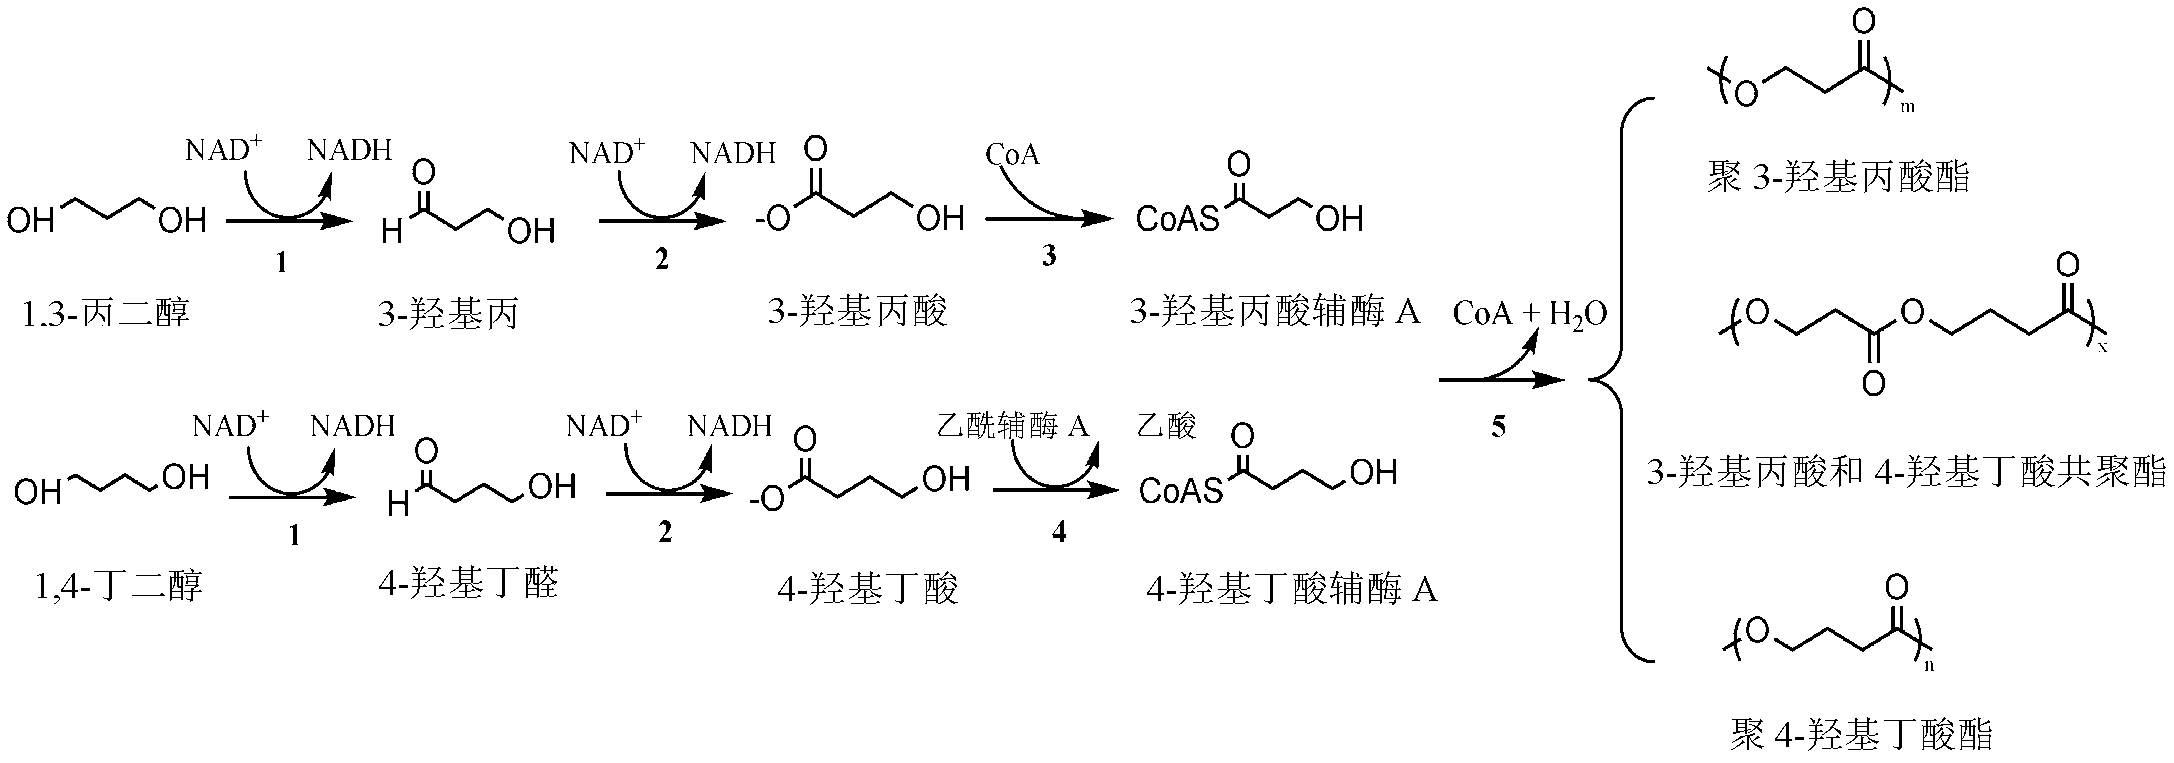 Recombinant bacteria for producing copolymer of 3-hydracrylic acid and 4-hydroxybutyric acid and application thereof